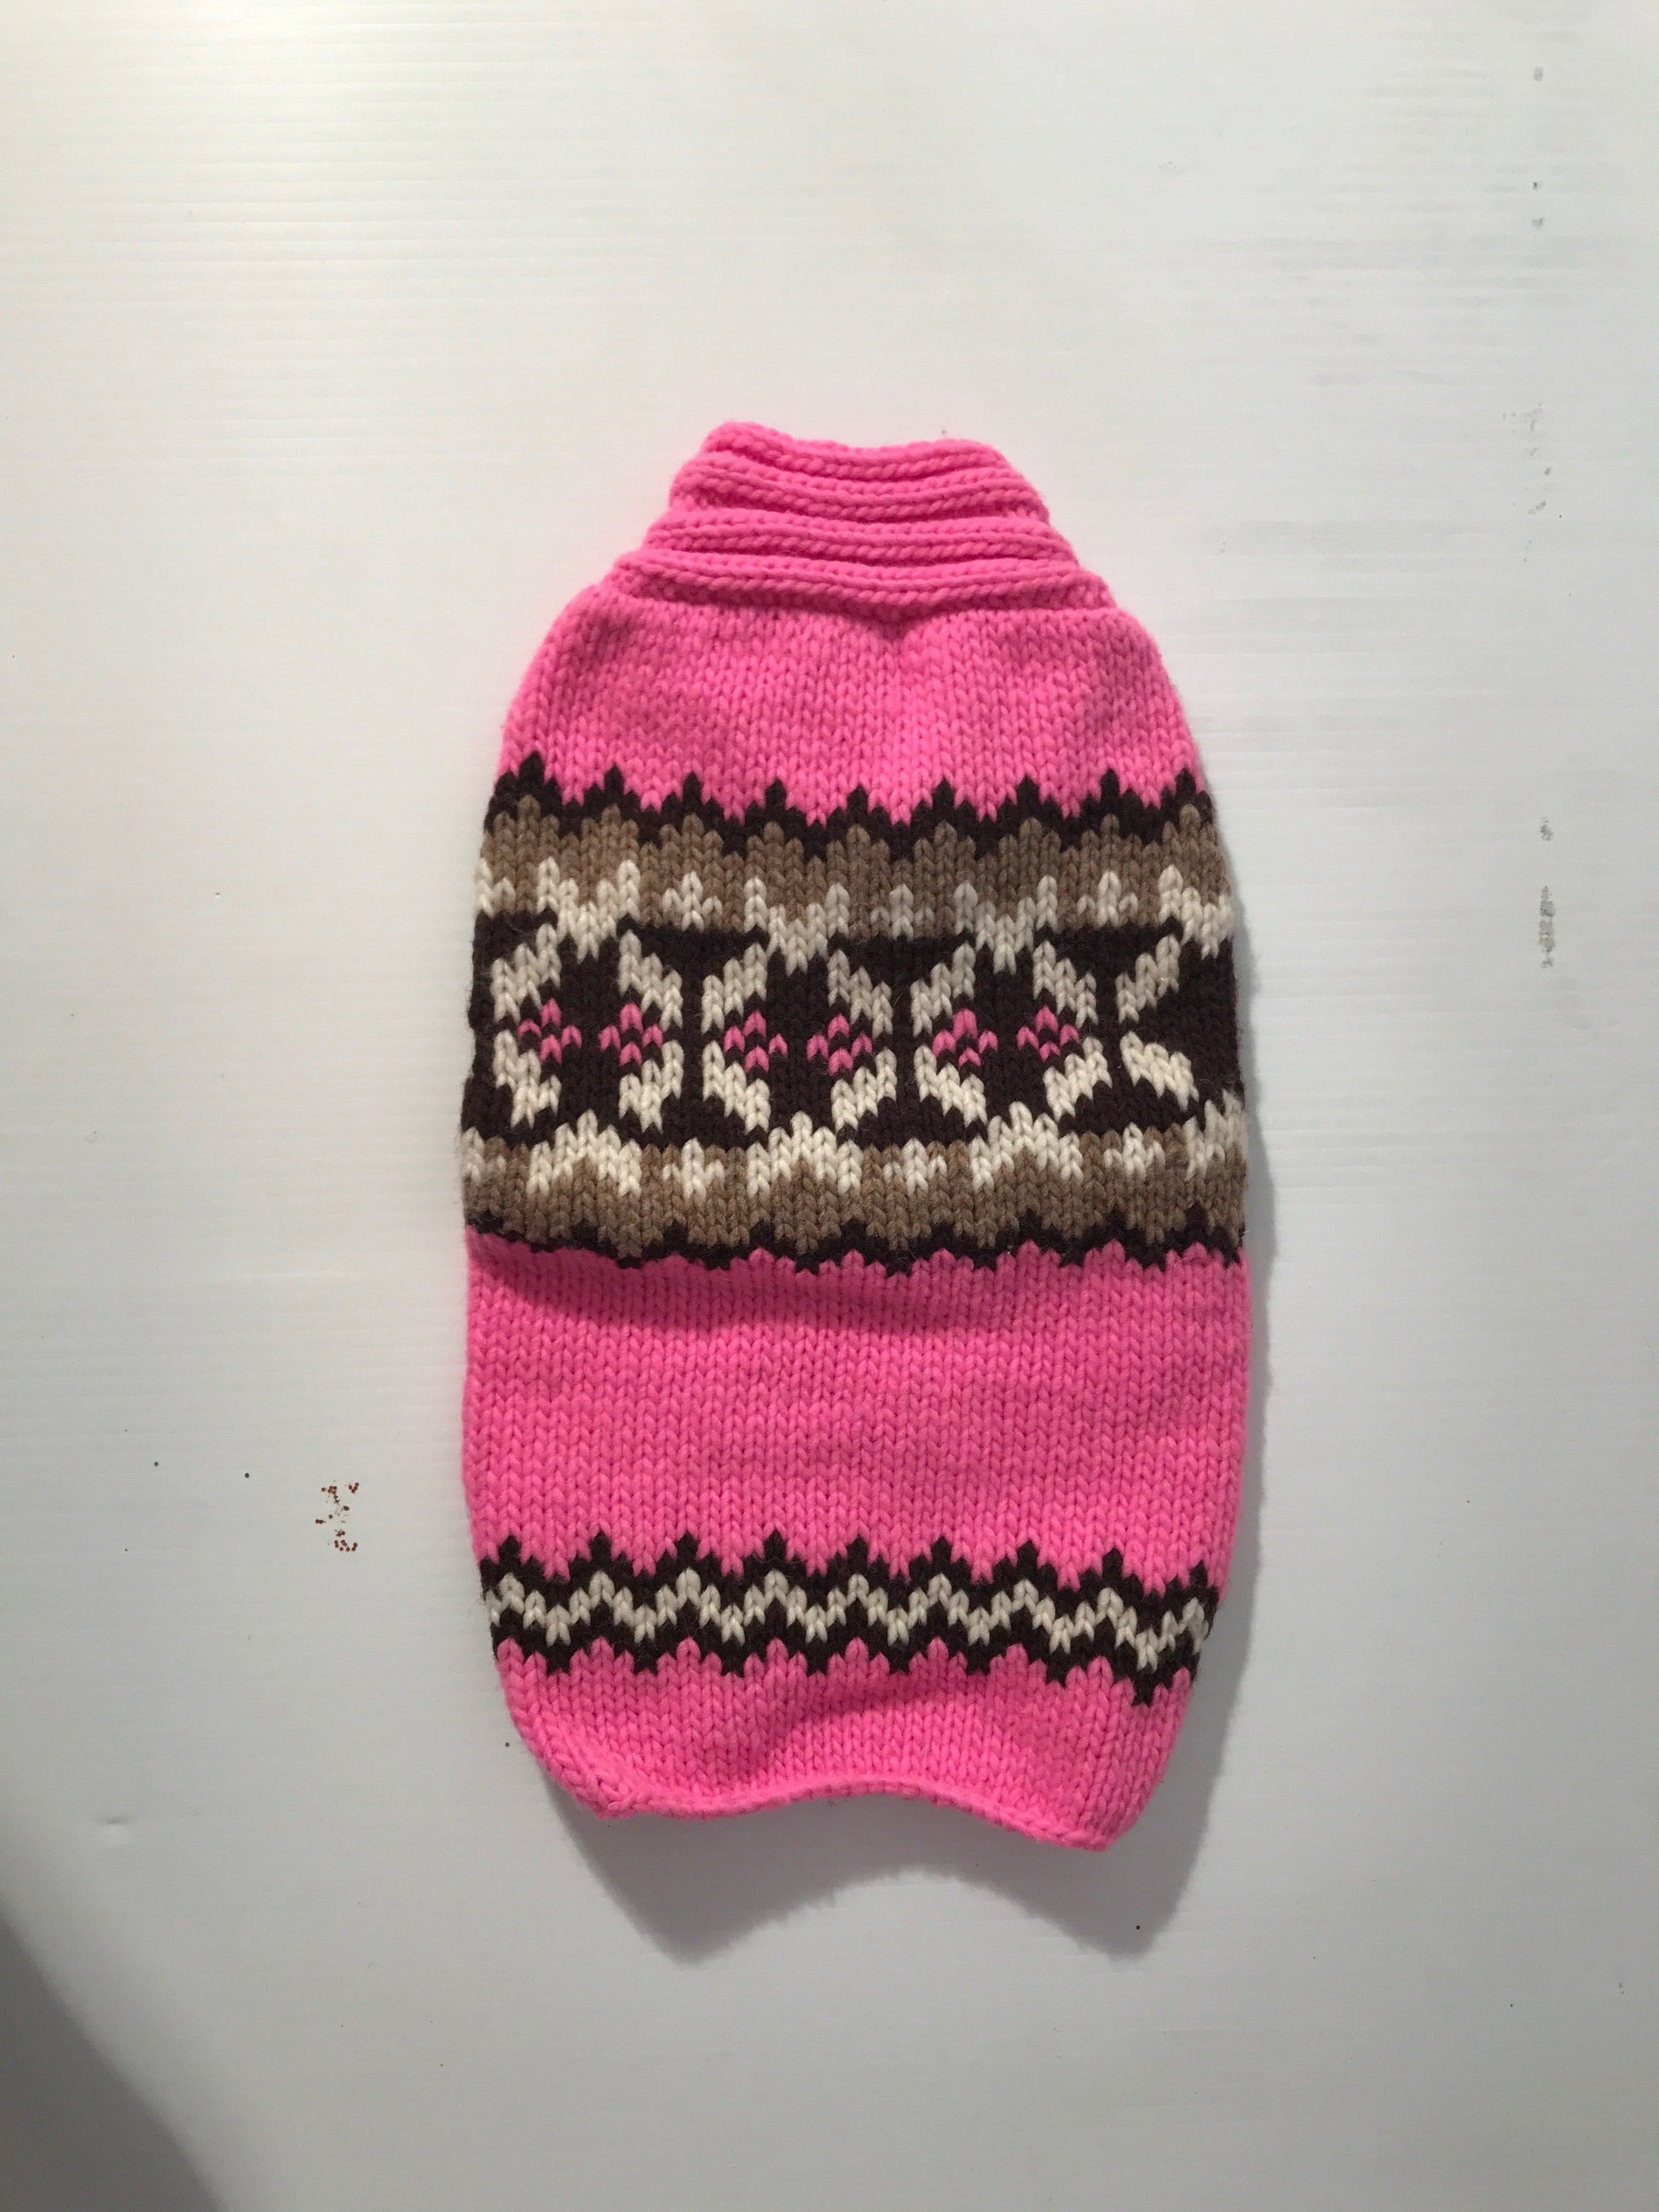 Hot Pink and Brown Sweater.